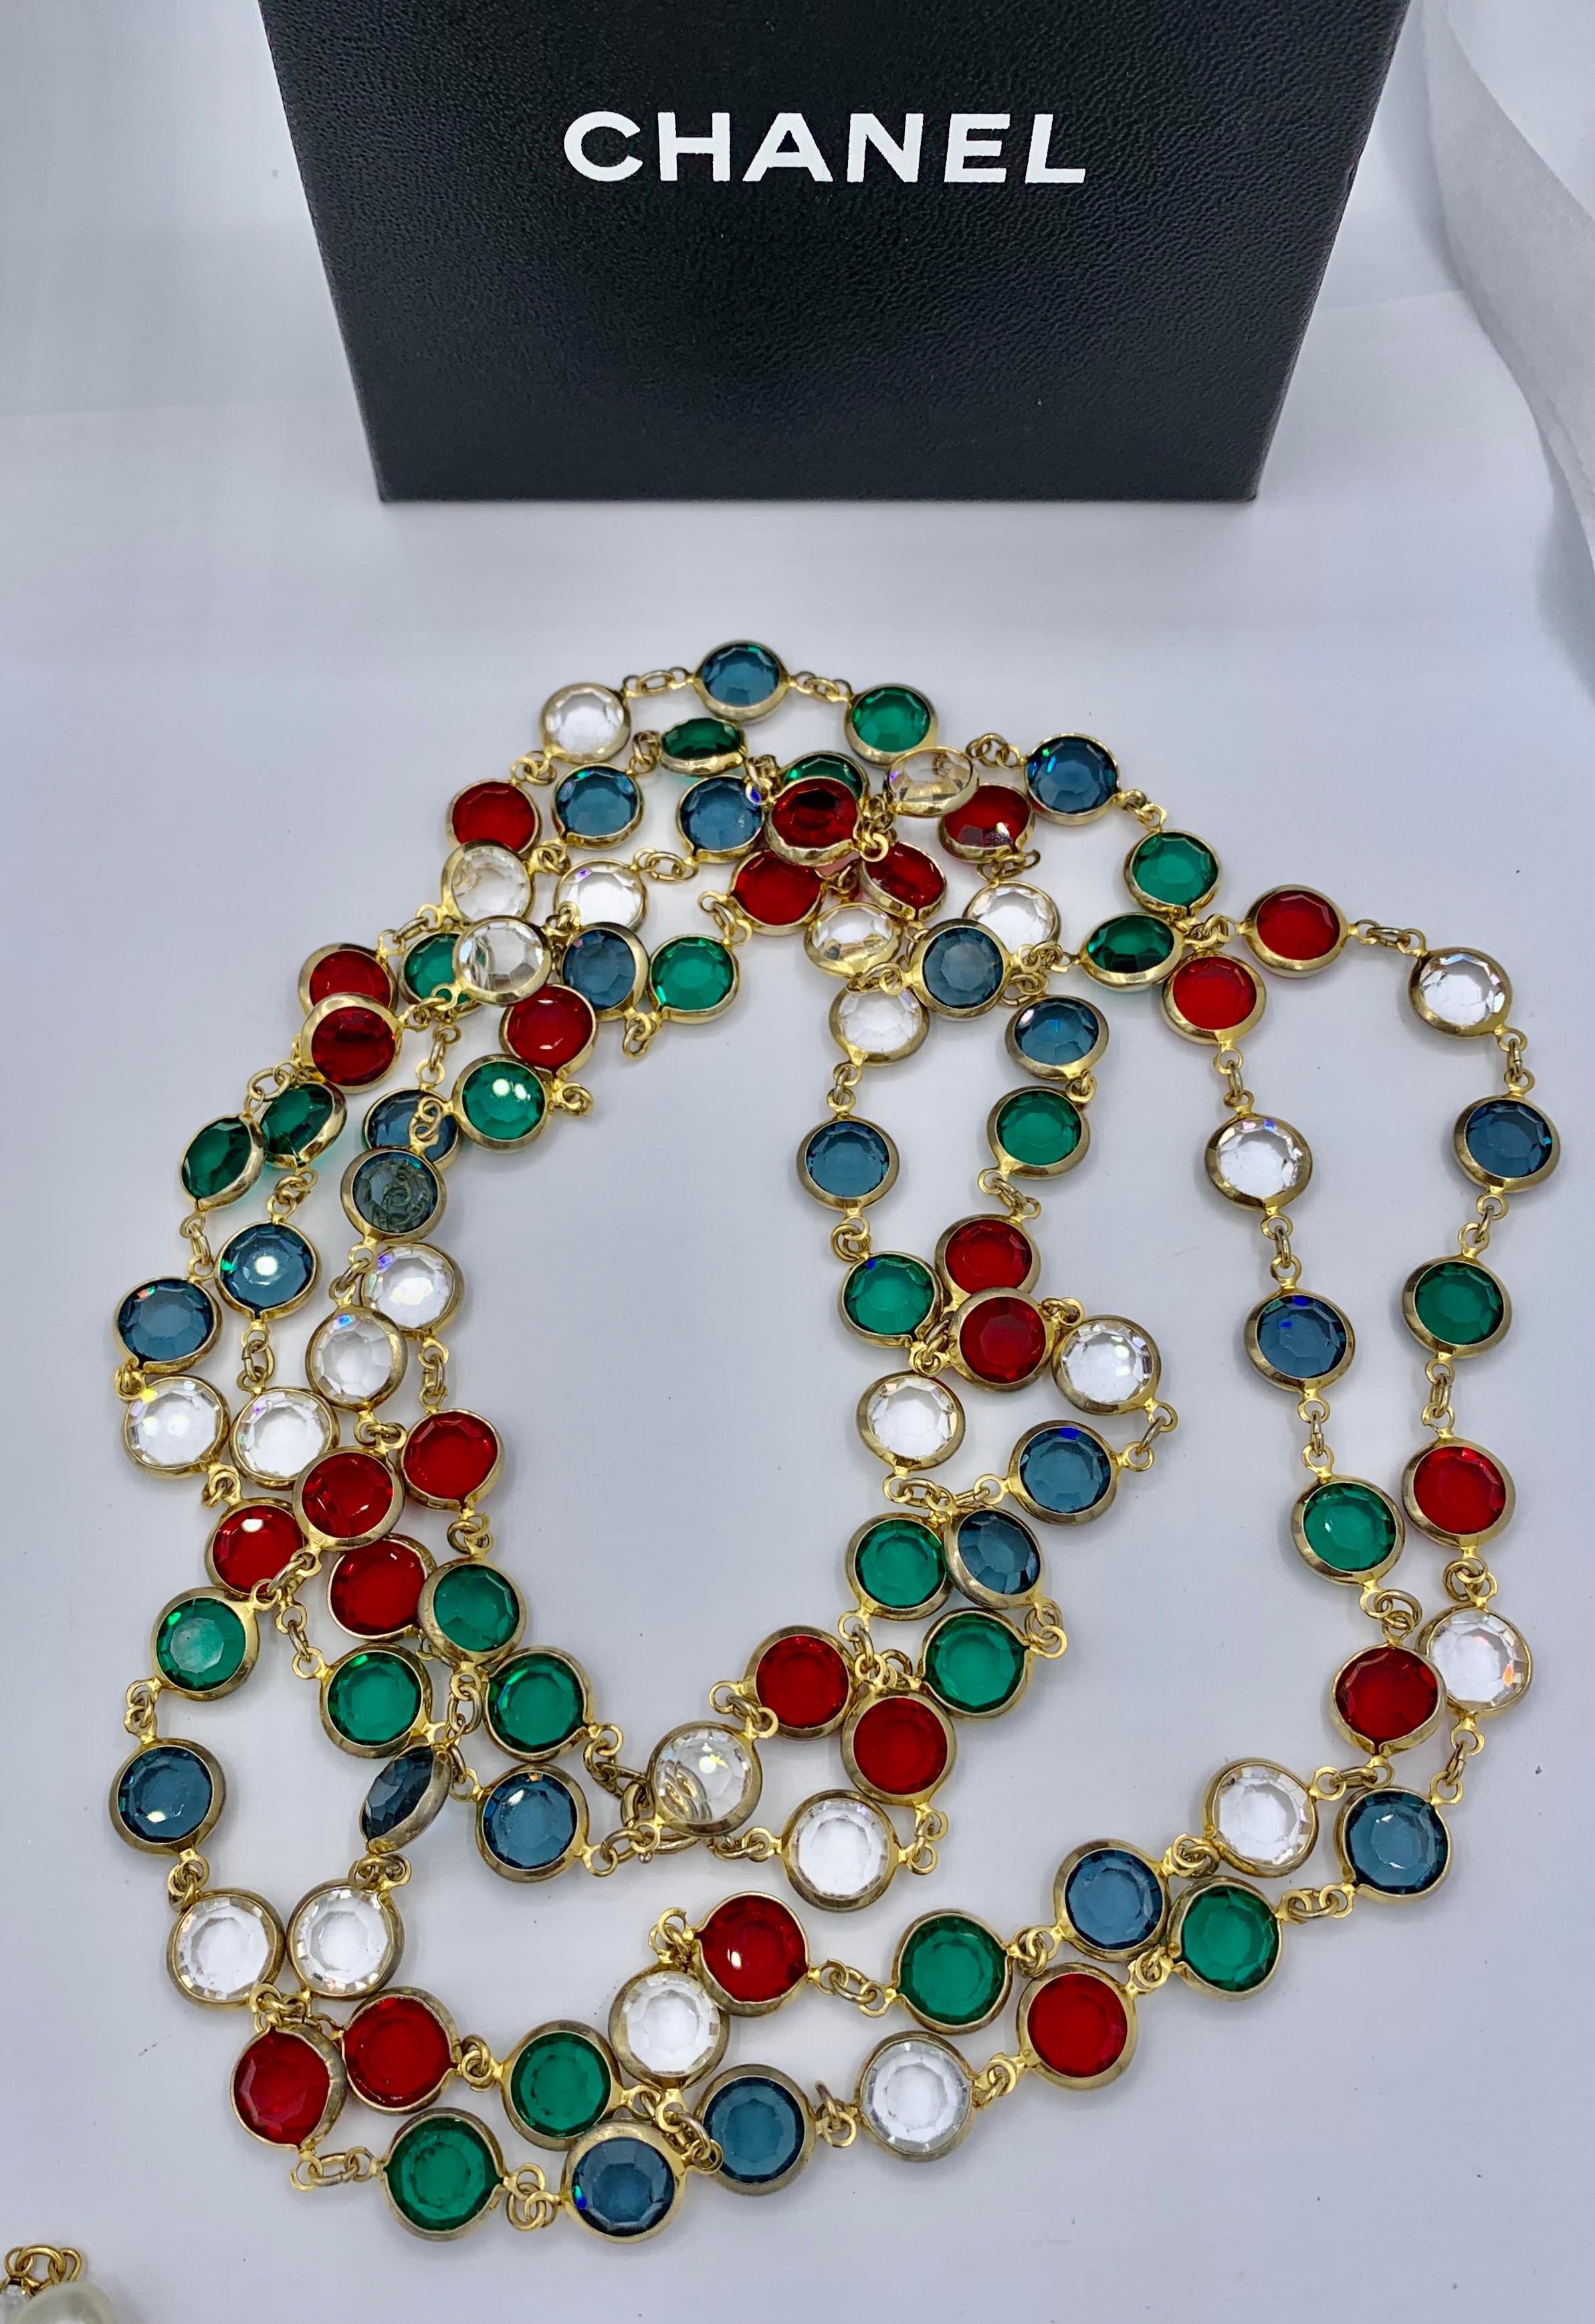 Two Chanel Gripoix Necklaces 1981 Signed Estate of Barbara Taylor Bradford For Sale 9